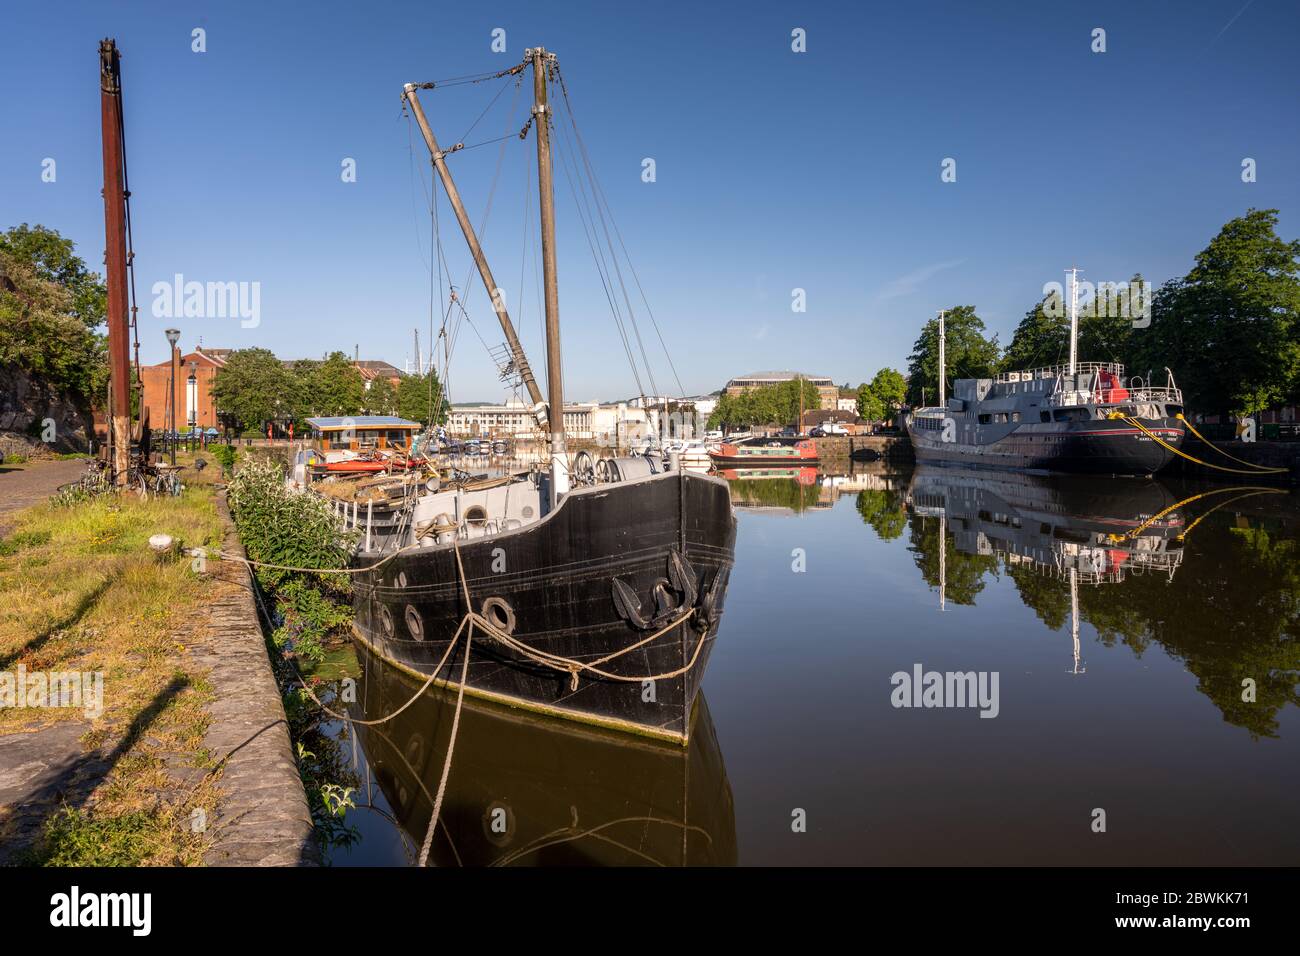 Bristol, England, UK - May 25, 2020: Early morning light shines on historic boats docked in Bristol's Floating Harbour. Stock Photo